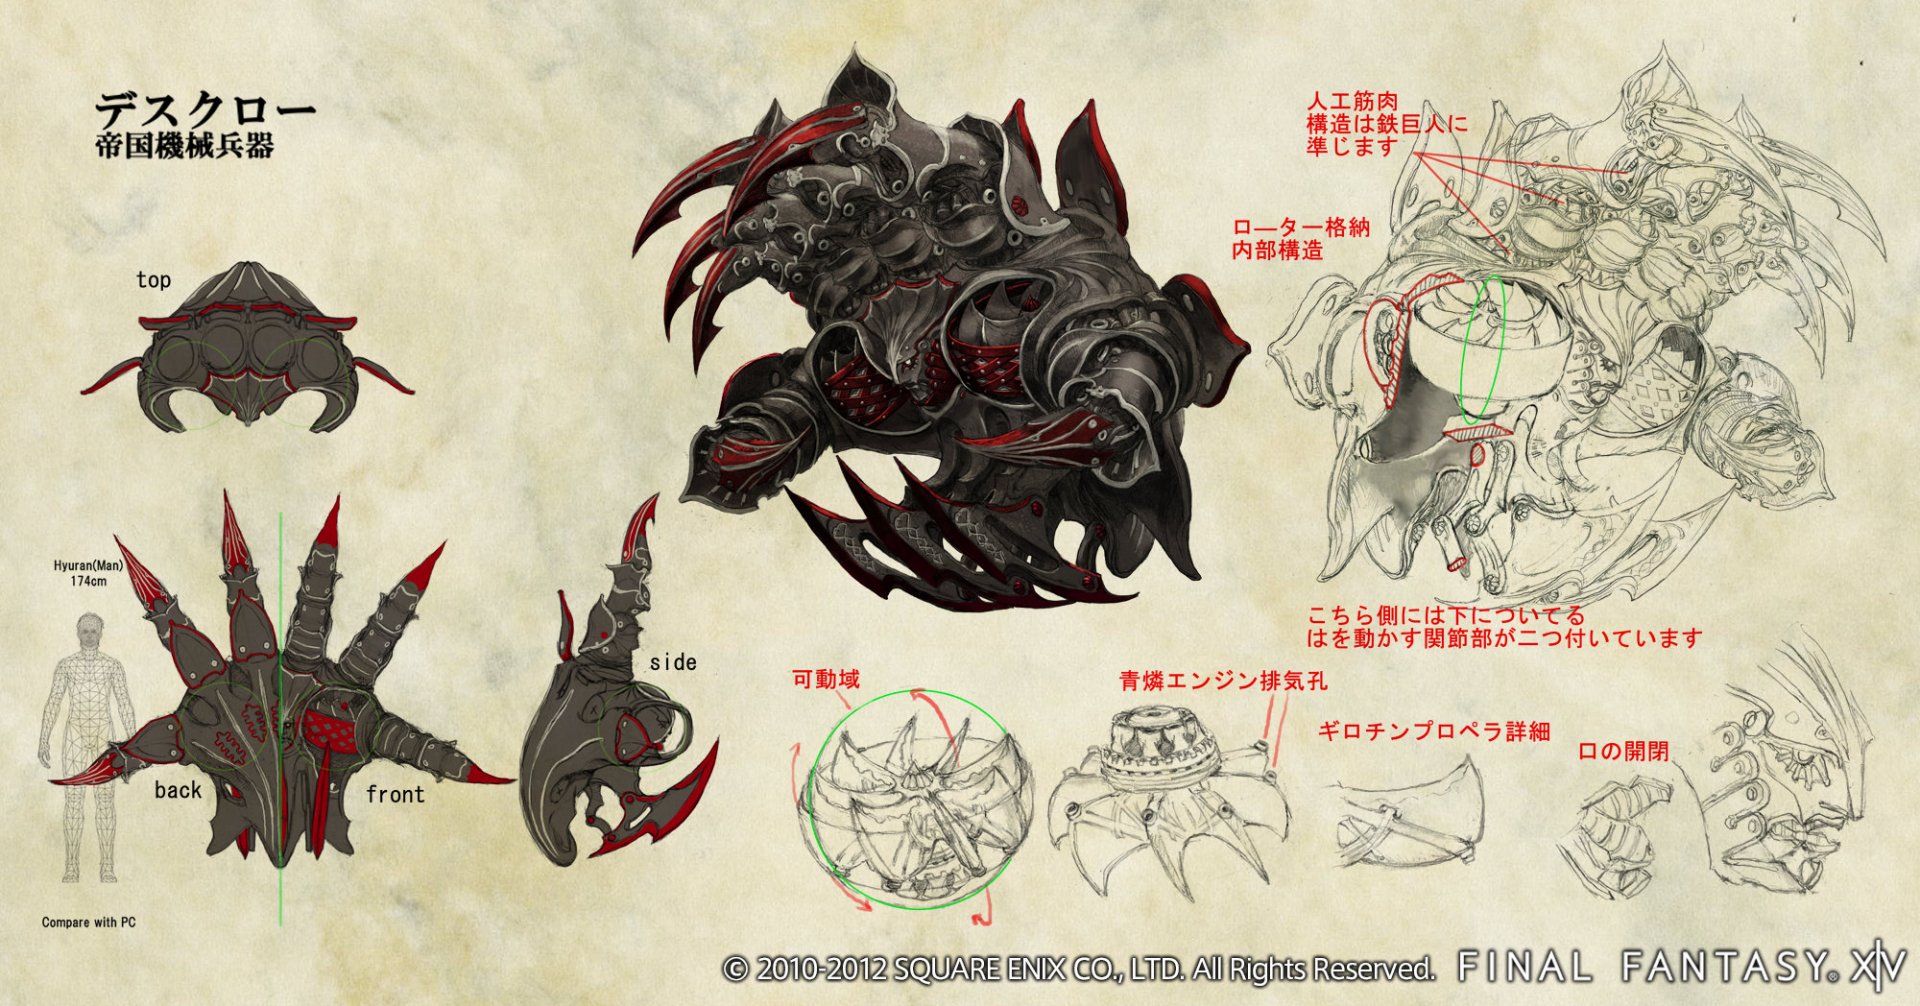 HD desktop wallpaper featuring concept art of a creature from Final Fantasy XIV: A Realm Reborn, with annotations in Japanese.